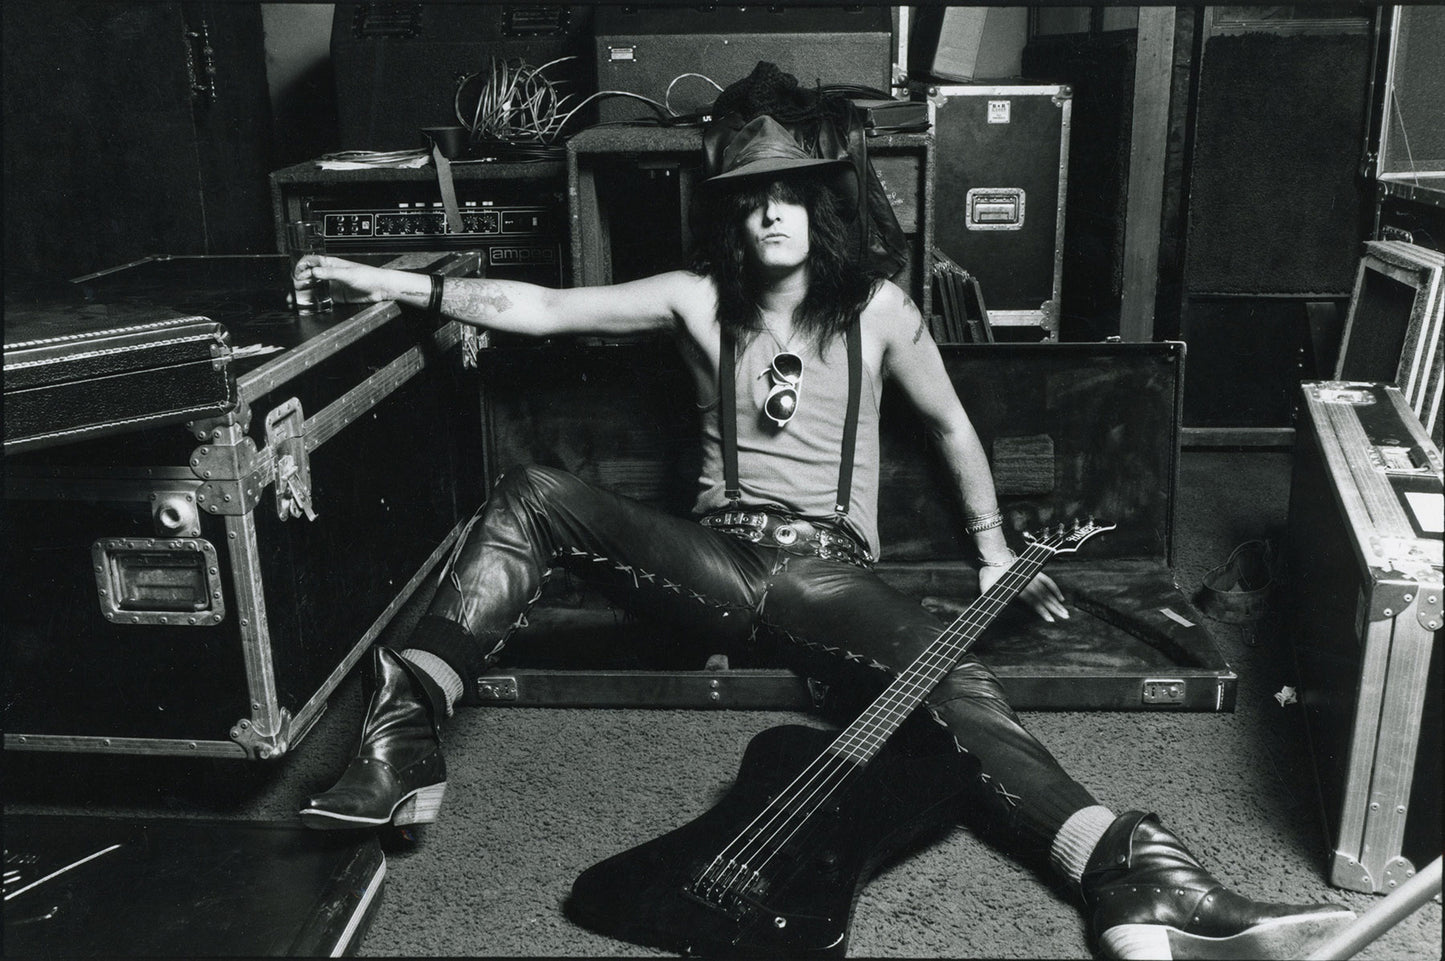 Nikki Sixx poses with his bass guitar and other instruments